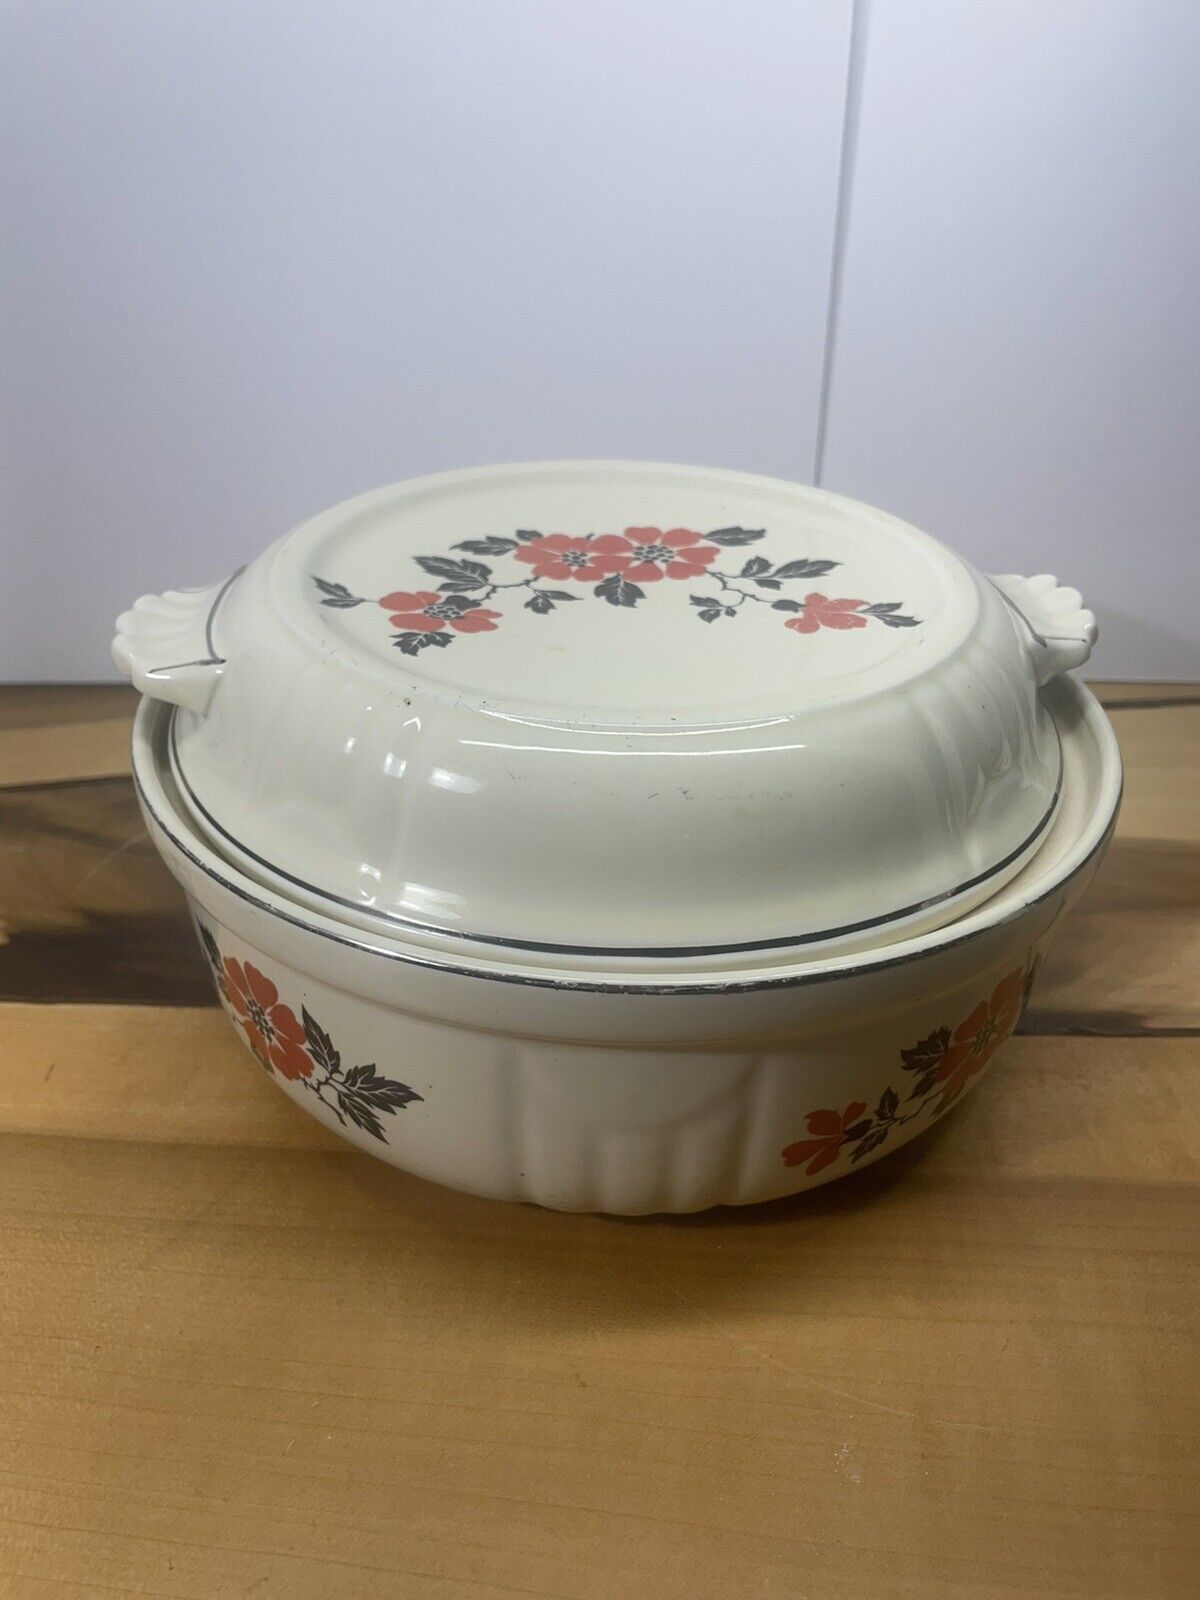 Vintage Superior Quality Kitchenware Red Poppy Covered Casserole Dish